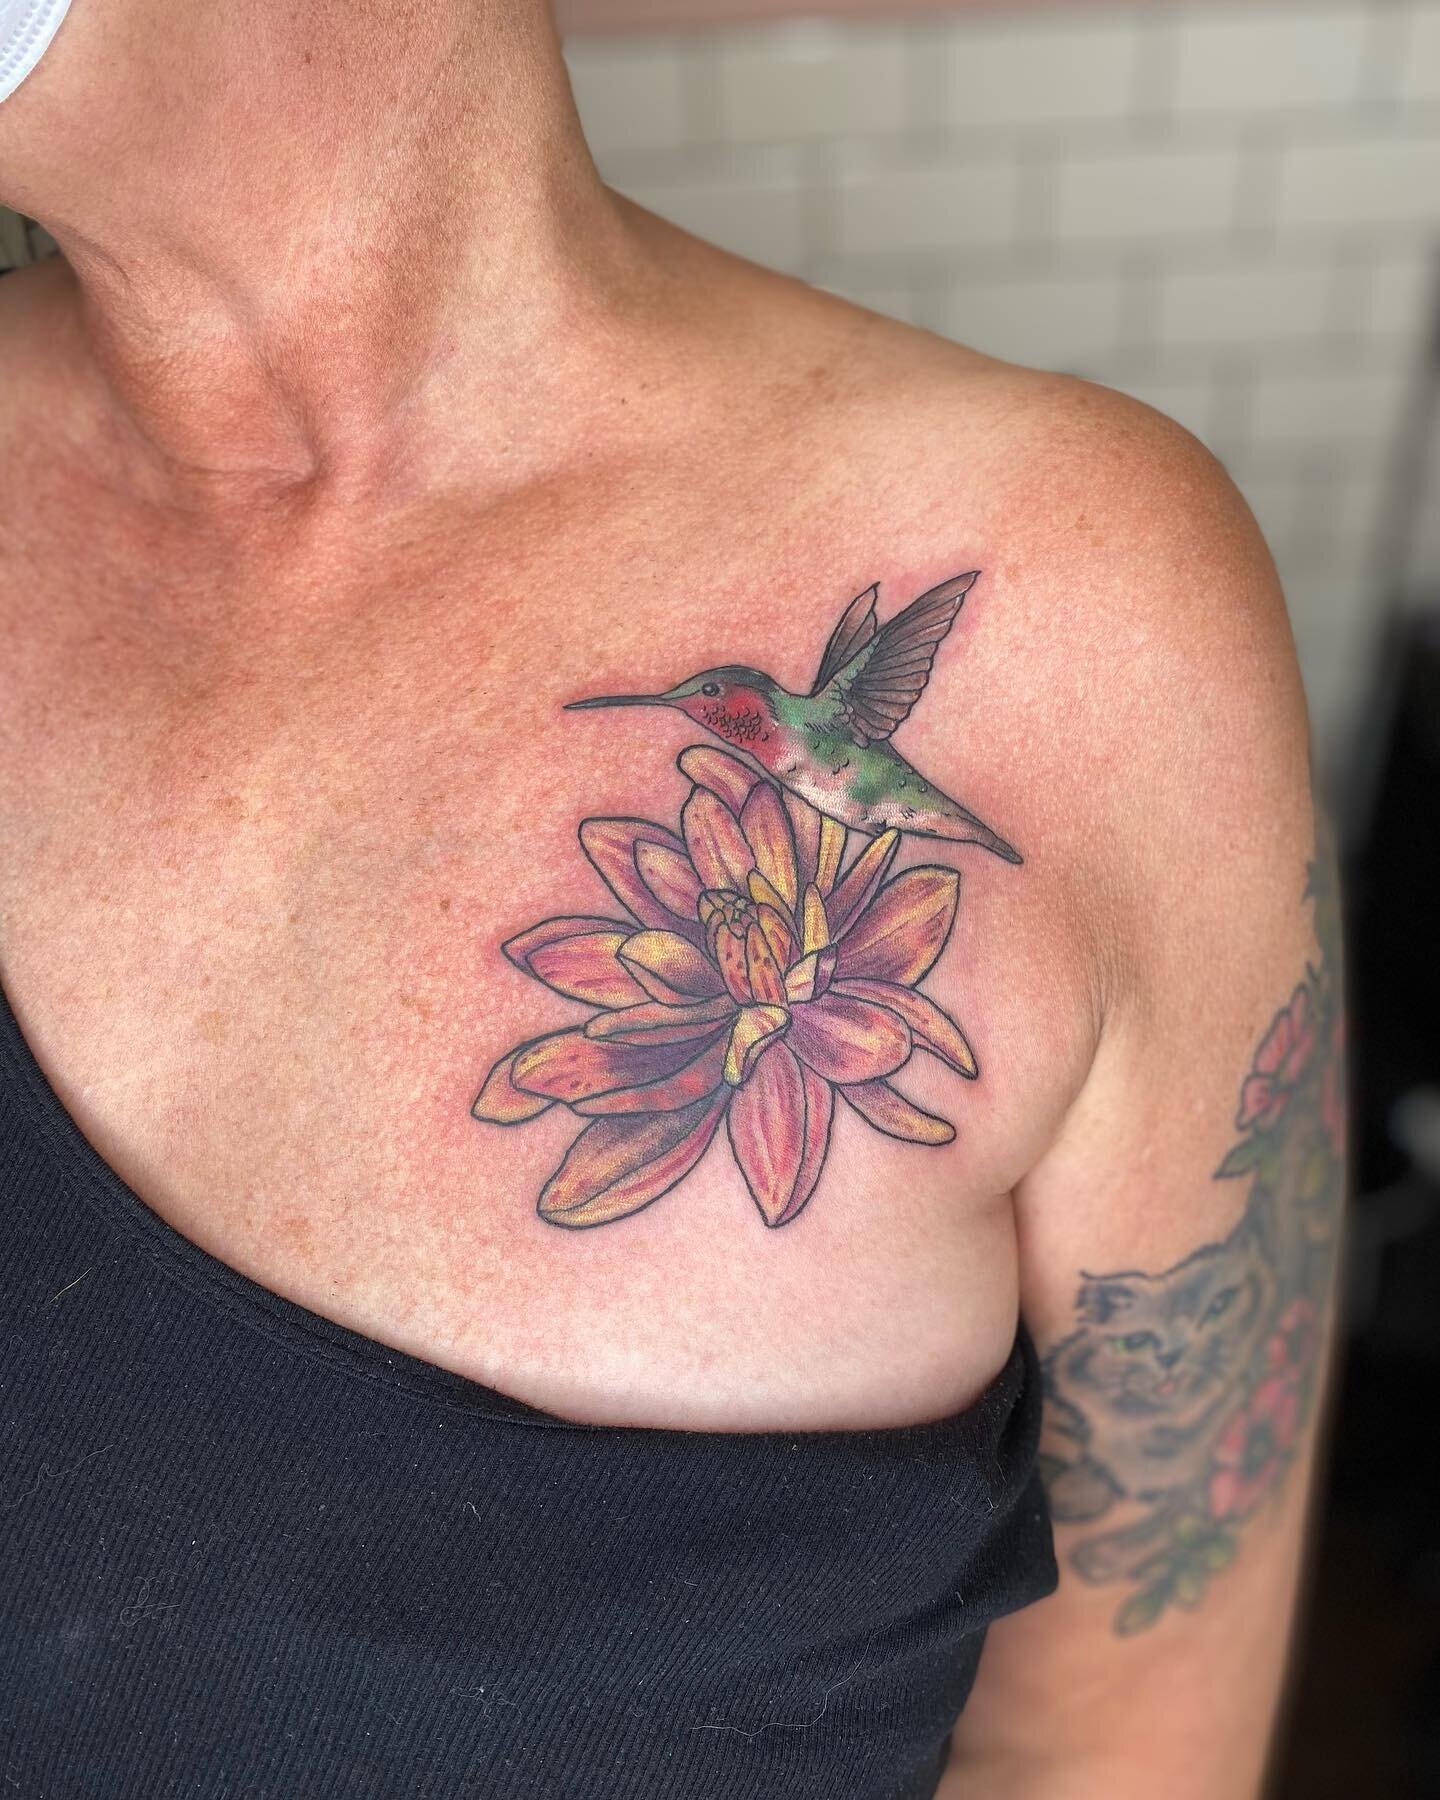 Zinnia and hummingbird coverup for Jocelyn 🌸 swipe for before. Tattoosbyloorin@gmail.com for appointments 
.
.
.
#flowertattoo #zinniatattoo #hummingbirdtattoo #coveruptattoo #torontotattoo #toronto #torontotattooartist #torontotattooshop #torontove